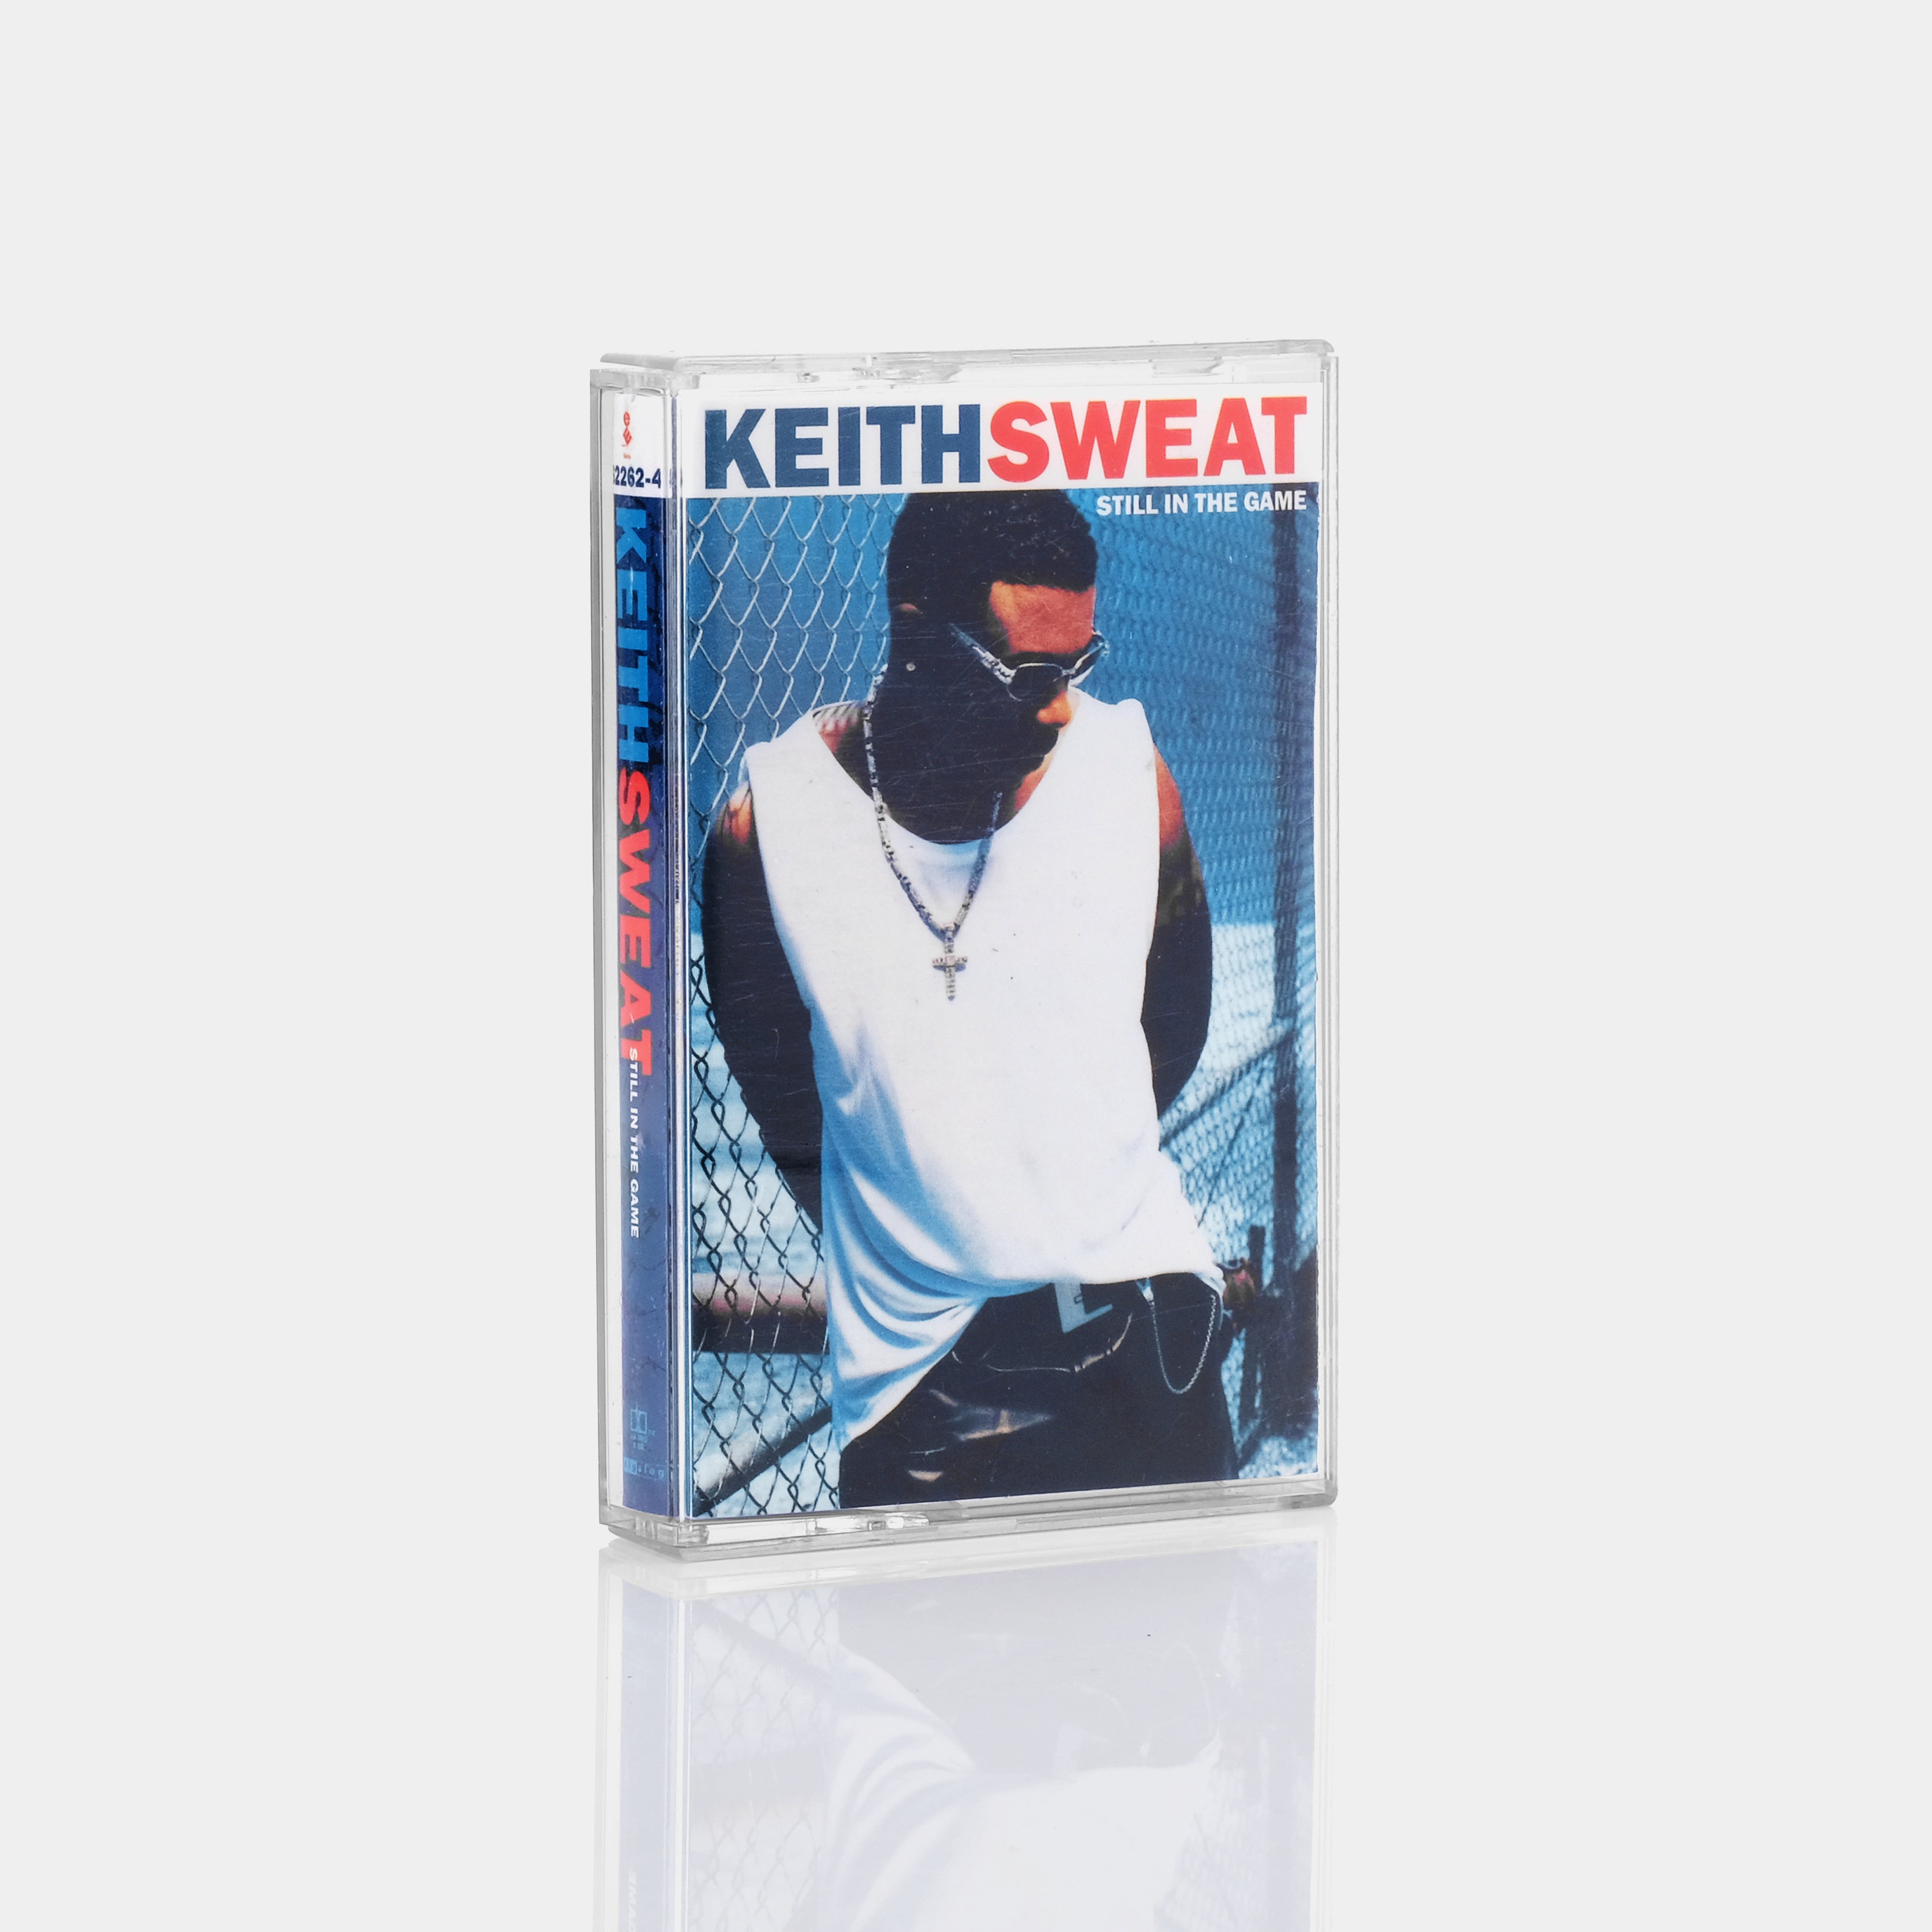 Keith Sweat - Still In The Game Cassette Tape